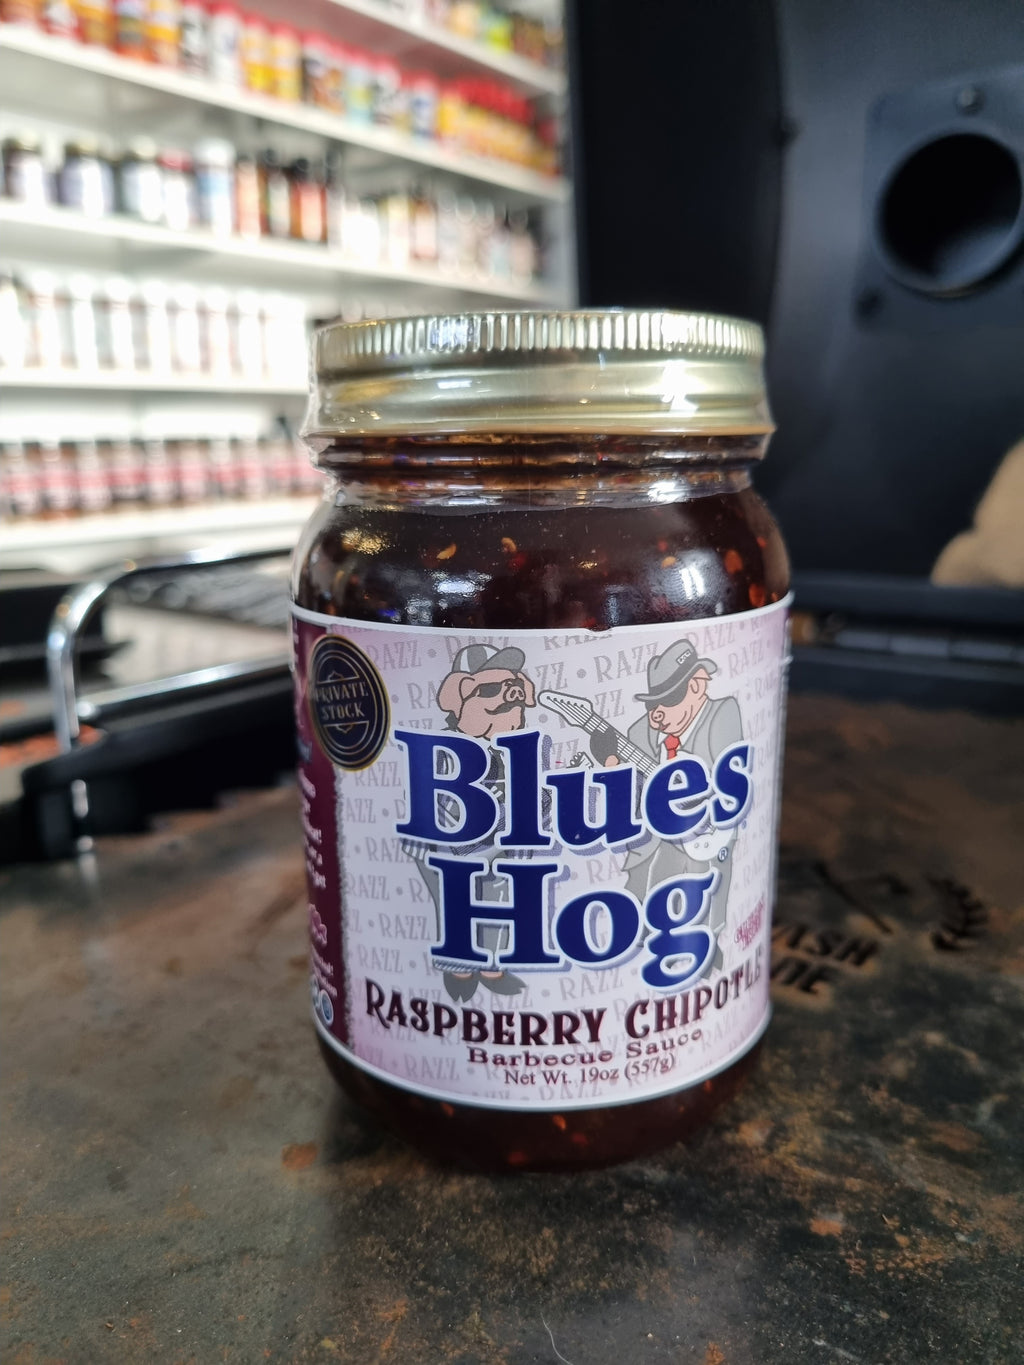 Raspberry Chipotle Barbecue Sauce 19oz by Blues Hog